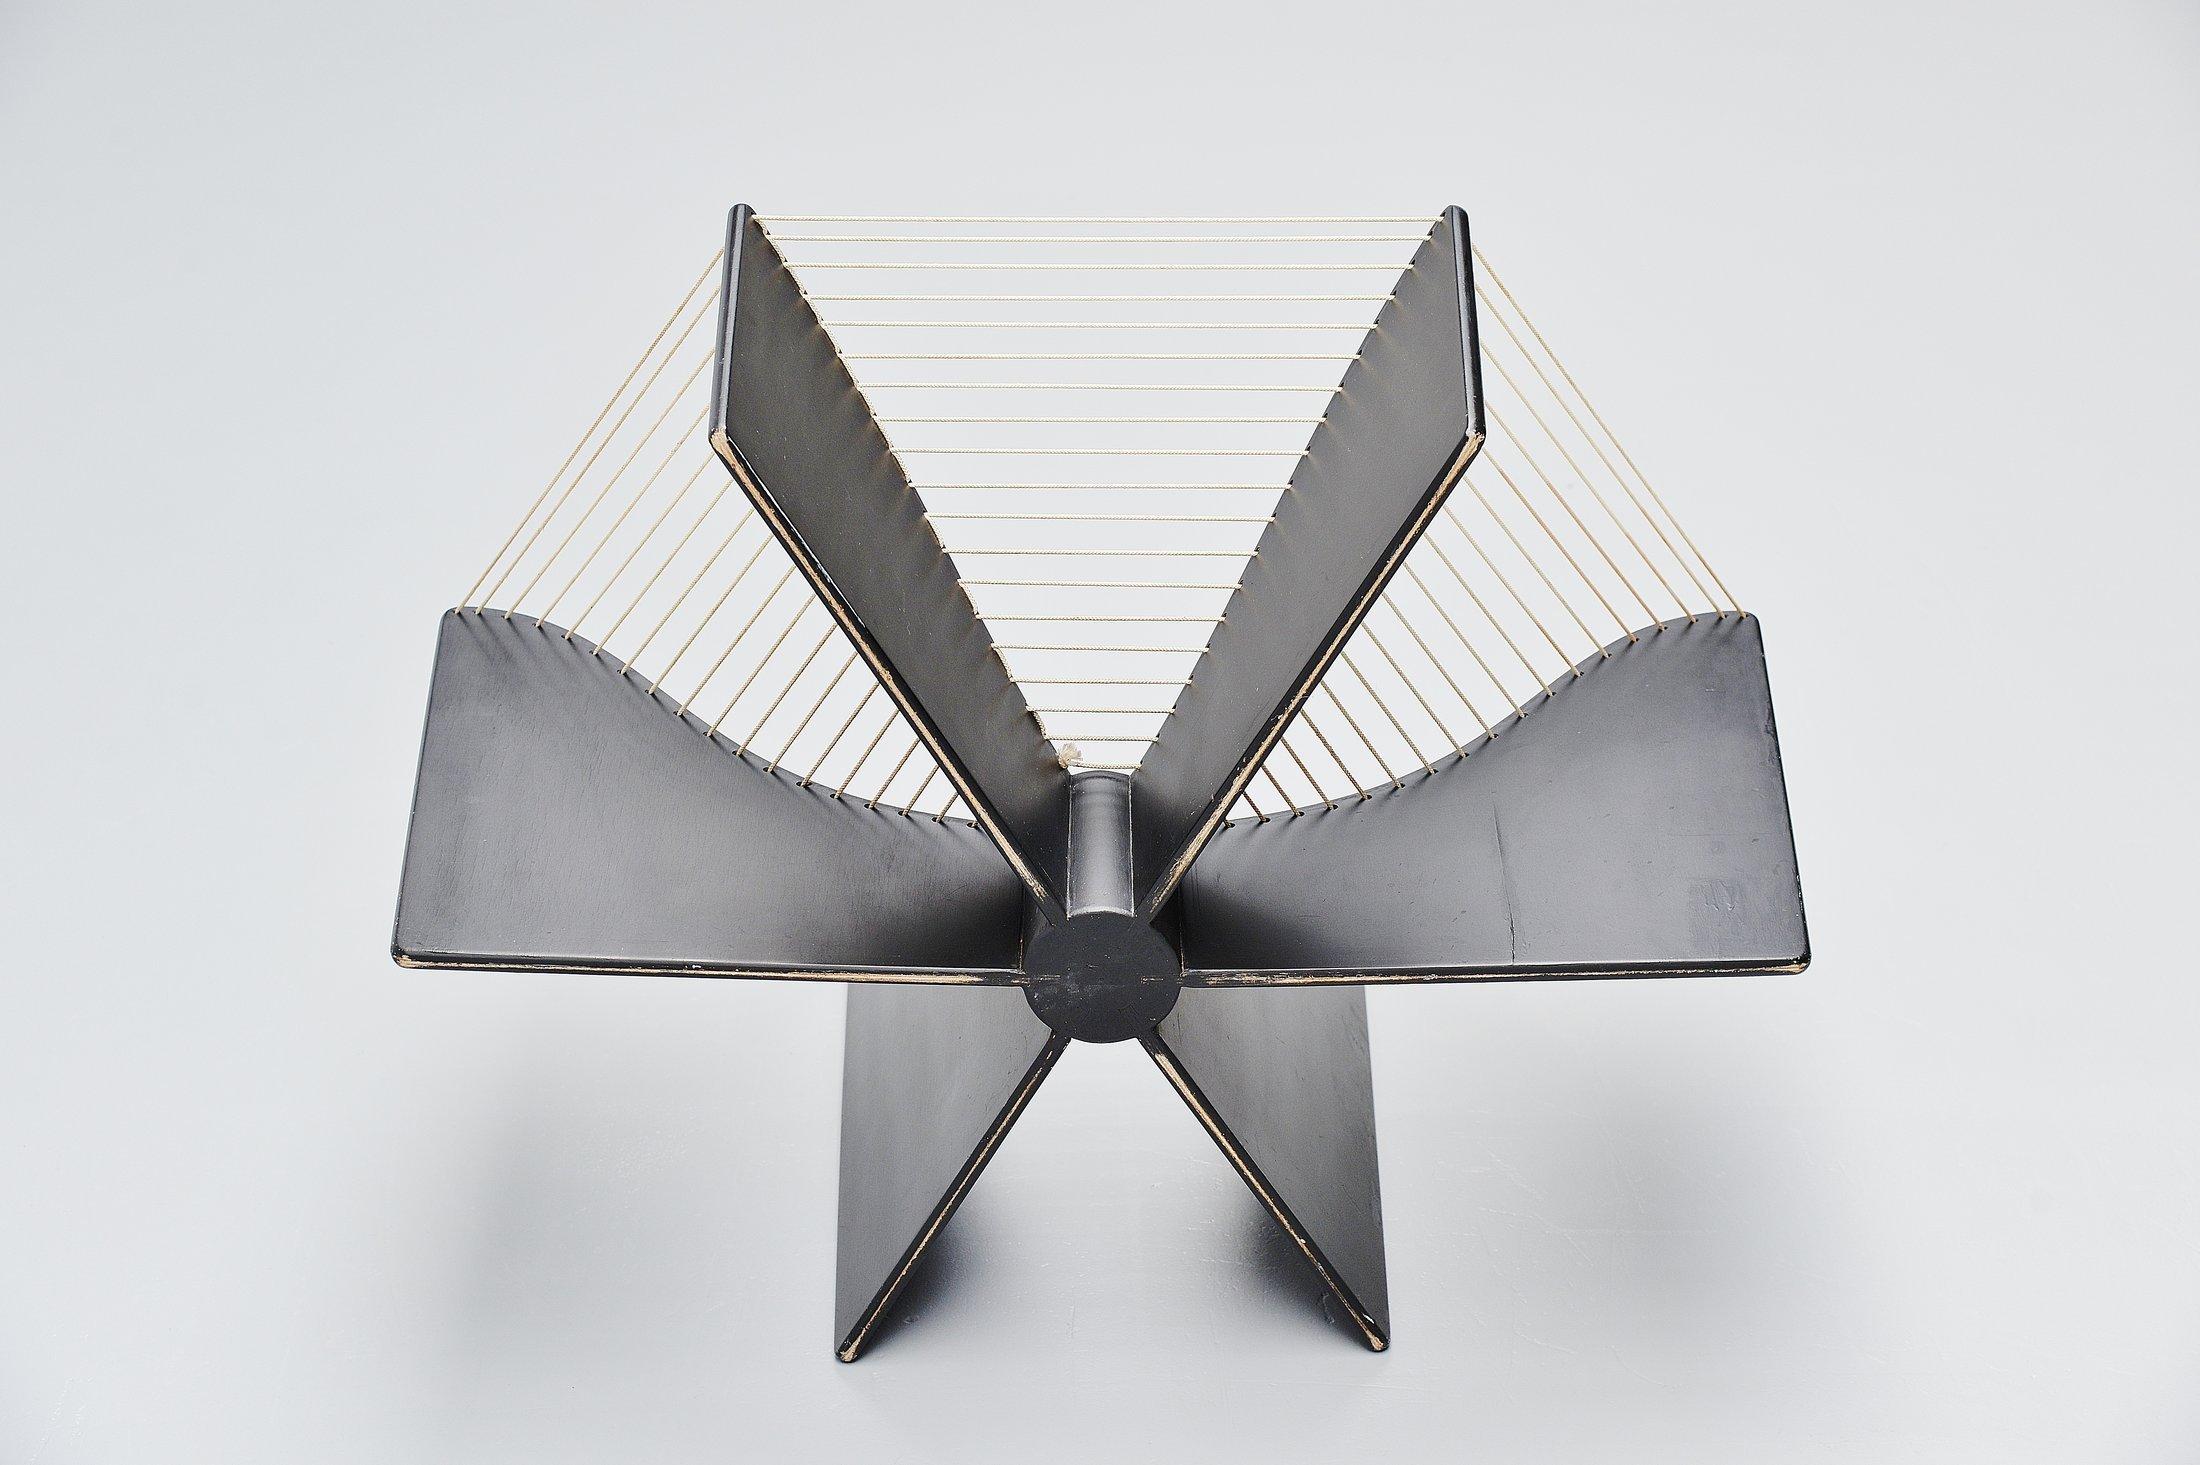 Leather Pierre Paulin F678 Spider Lounge Chair Artifort, 1965